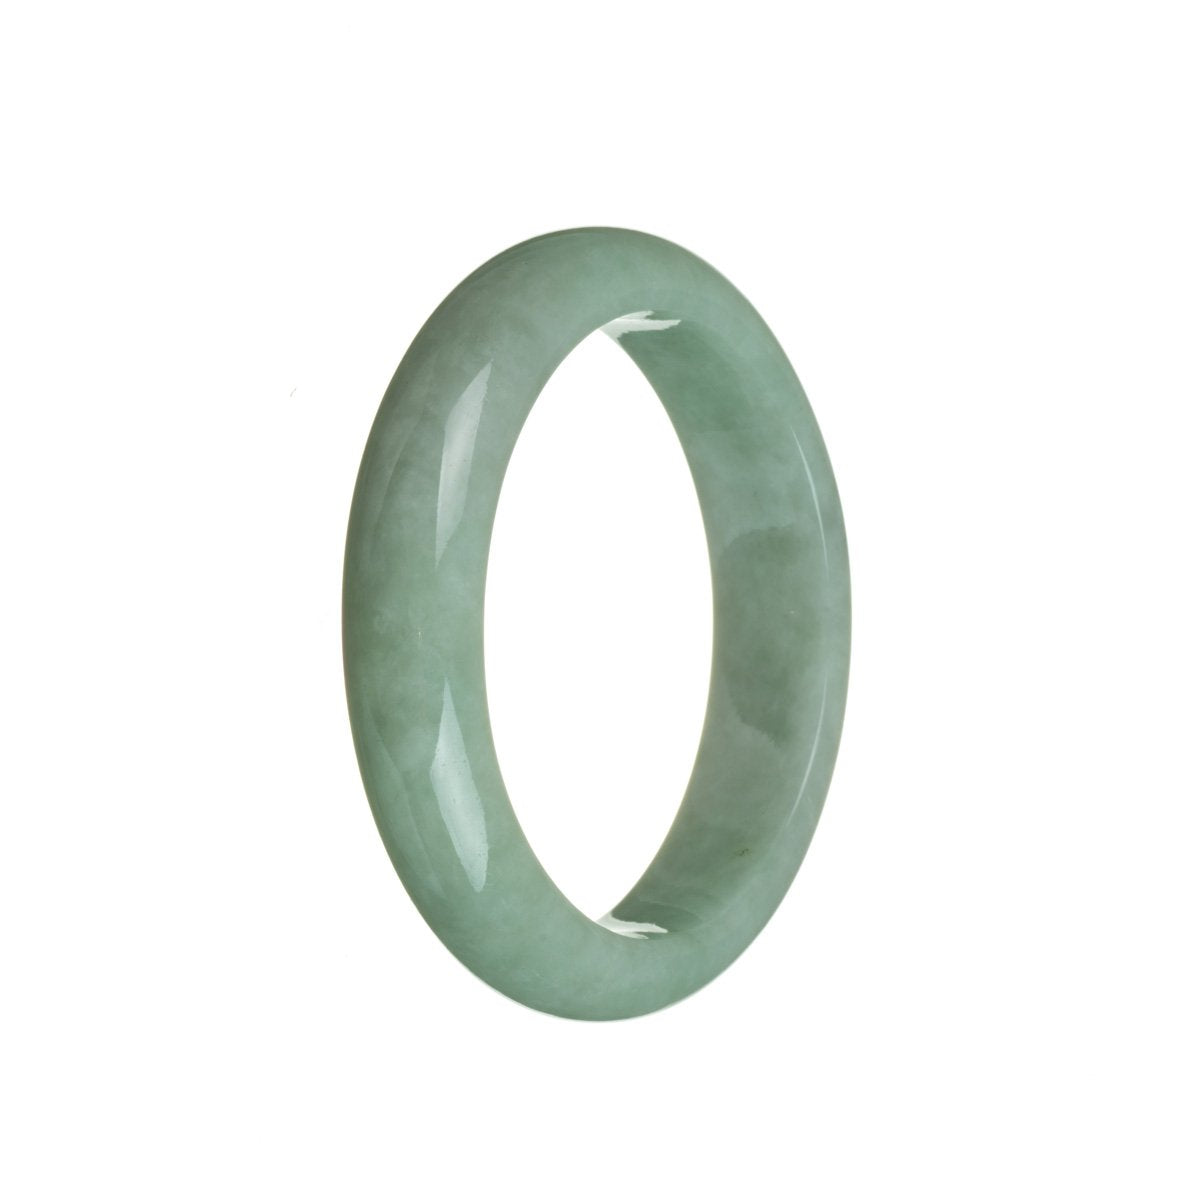 A light green jade bangle with a semi-round shape, measuring 55mm in size.